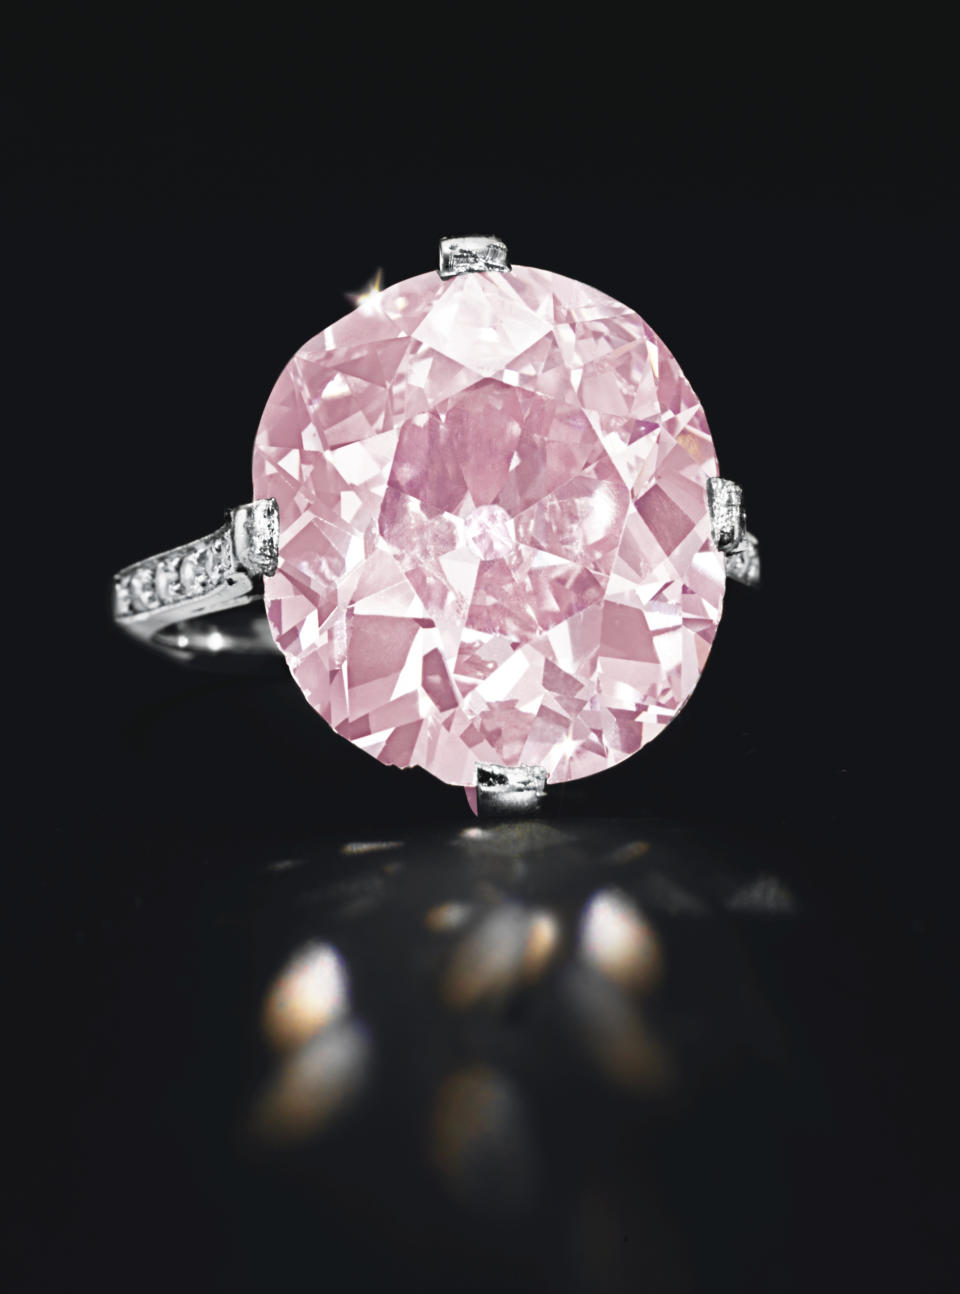 In this undated photo provided by Christie’s Auction House in New York, a rare pink cushion-cut 9-carat diamond ring from the estate of the late copper heiress Huguette Clark is shown. The piece, believed to be owned by Clark’s mother, sold for $15,762,500 at Christies’ New York Magnificent Jewels auction on Tuesday, April 17, 2012. (AP Photo/Christie’s Auction House)